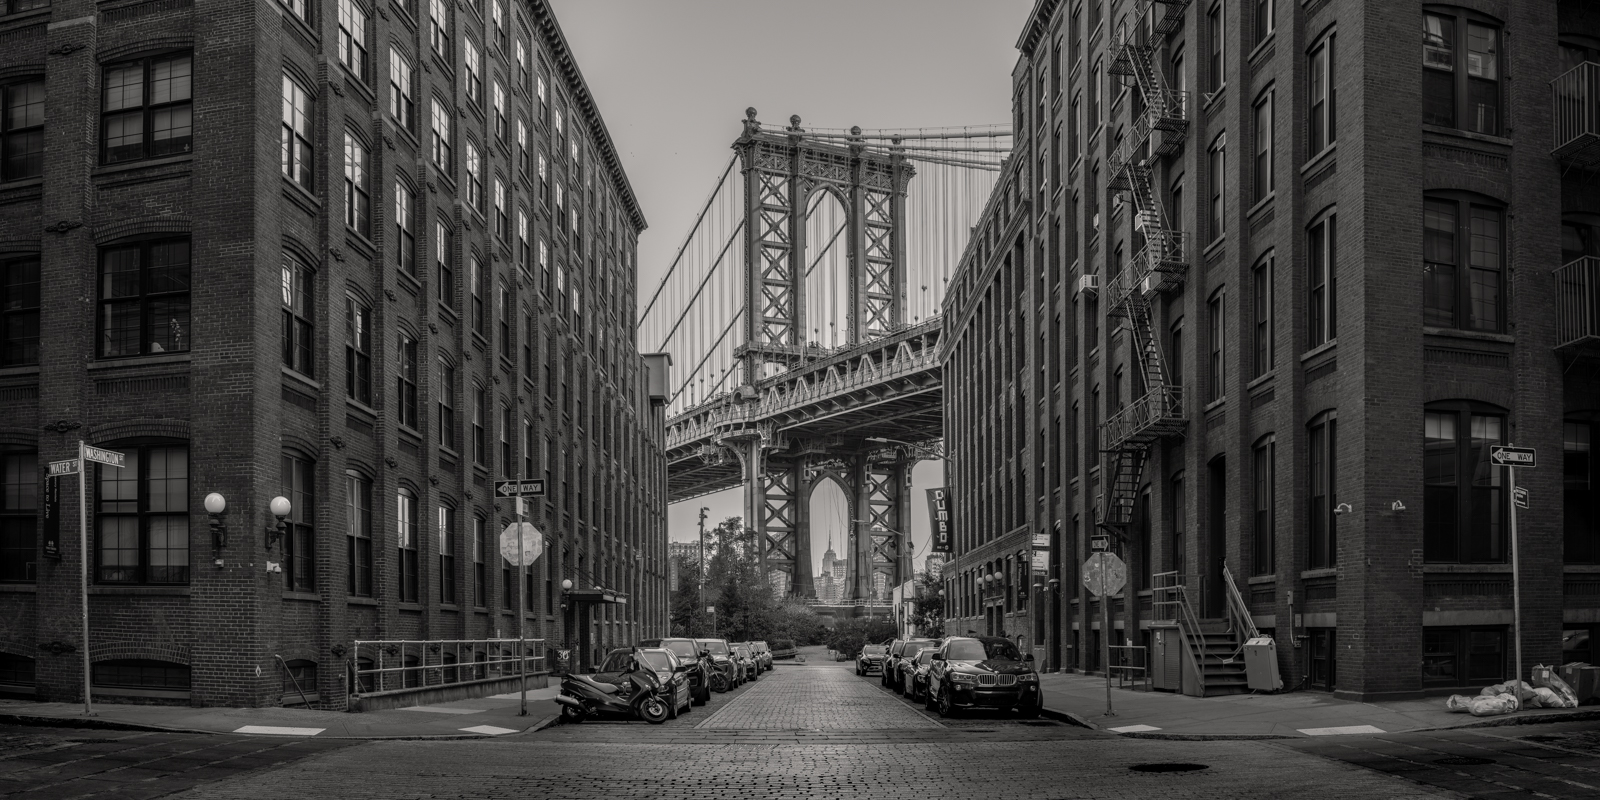 The grandeur of the Manhattan Bridge rises majestically at the end of this urban canyon, flanked by the timeless facades of Dumbo...